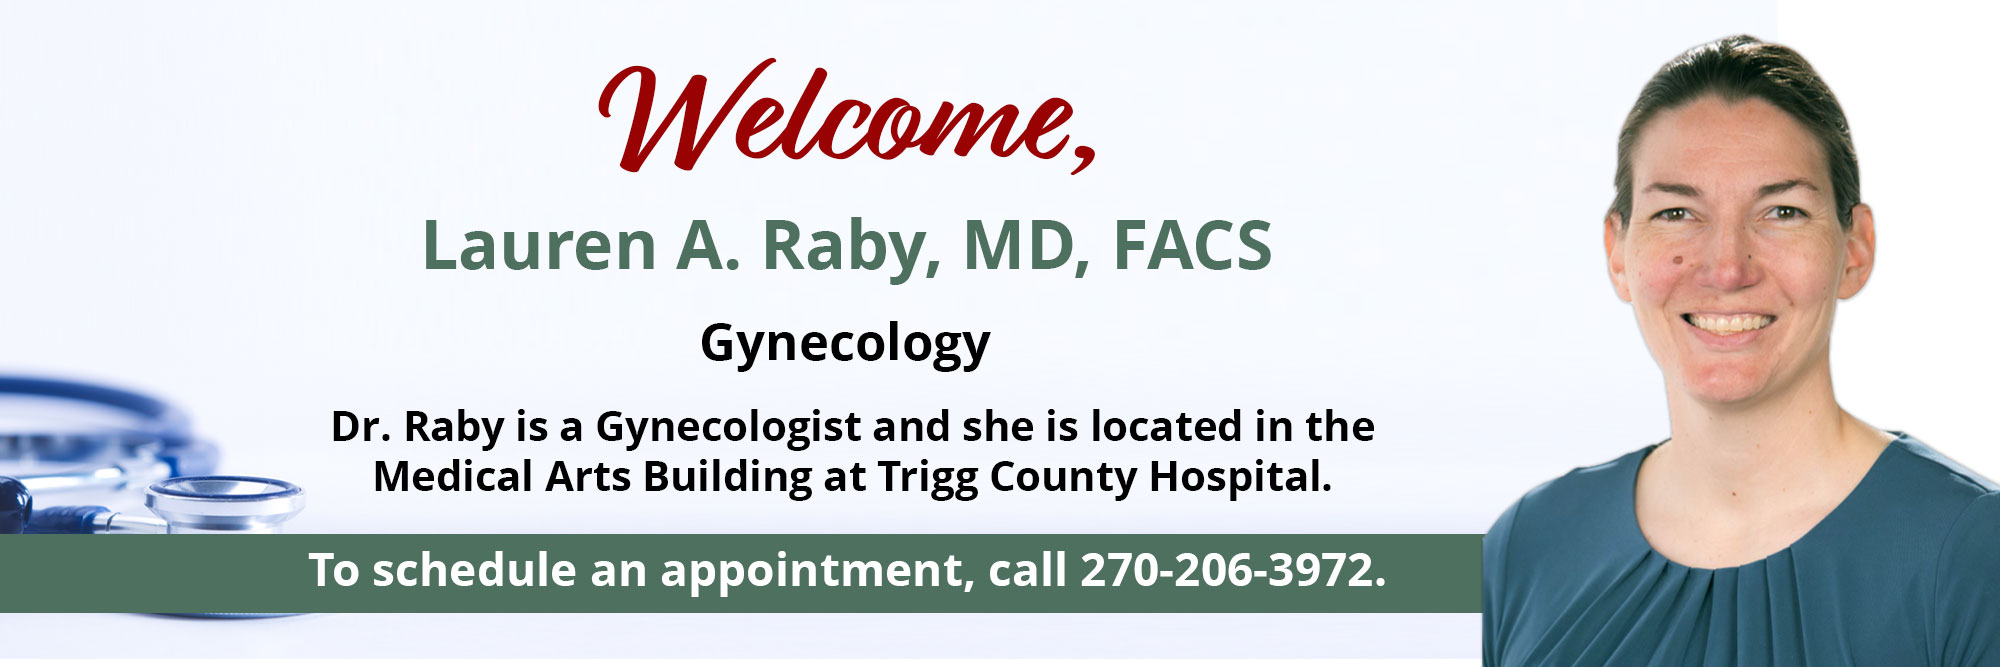 Dr. Raby is a Gynecologist and she is located in the Medical Arts Building at Trigg County Hospital.  To make an appointment, call 270-206-3972.